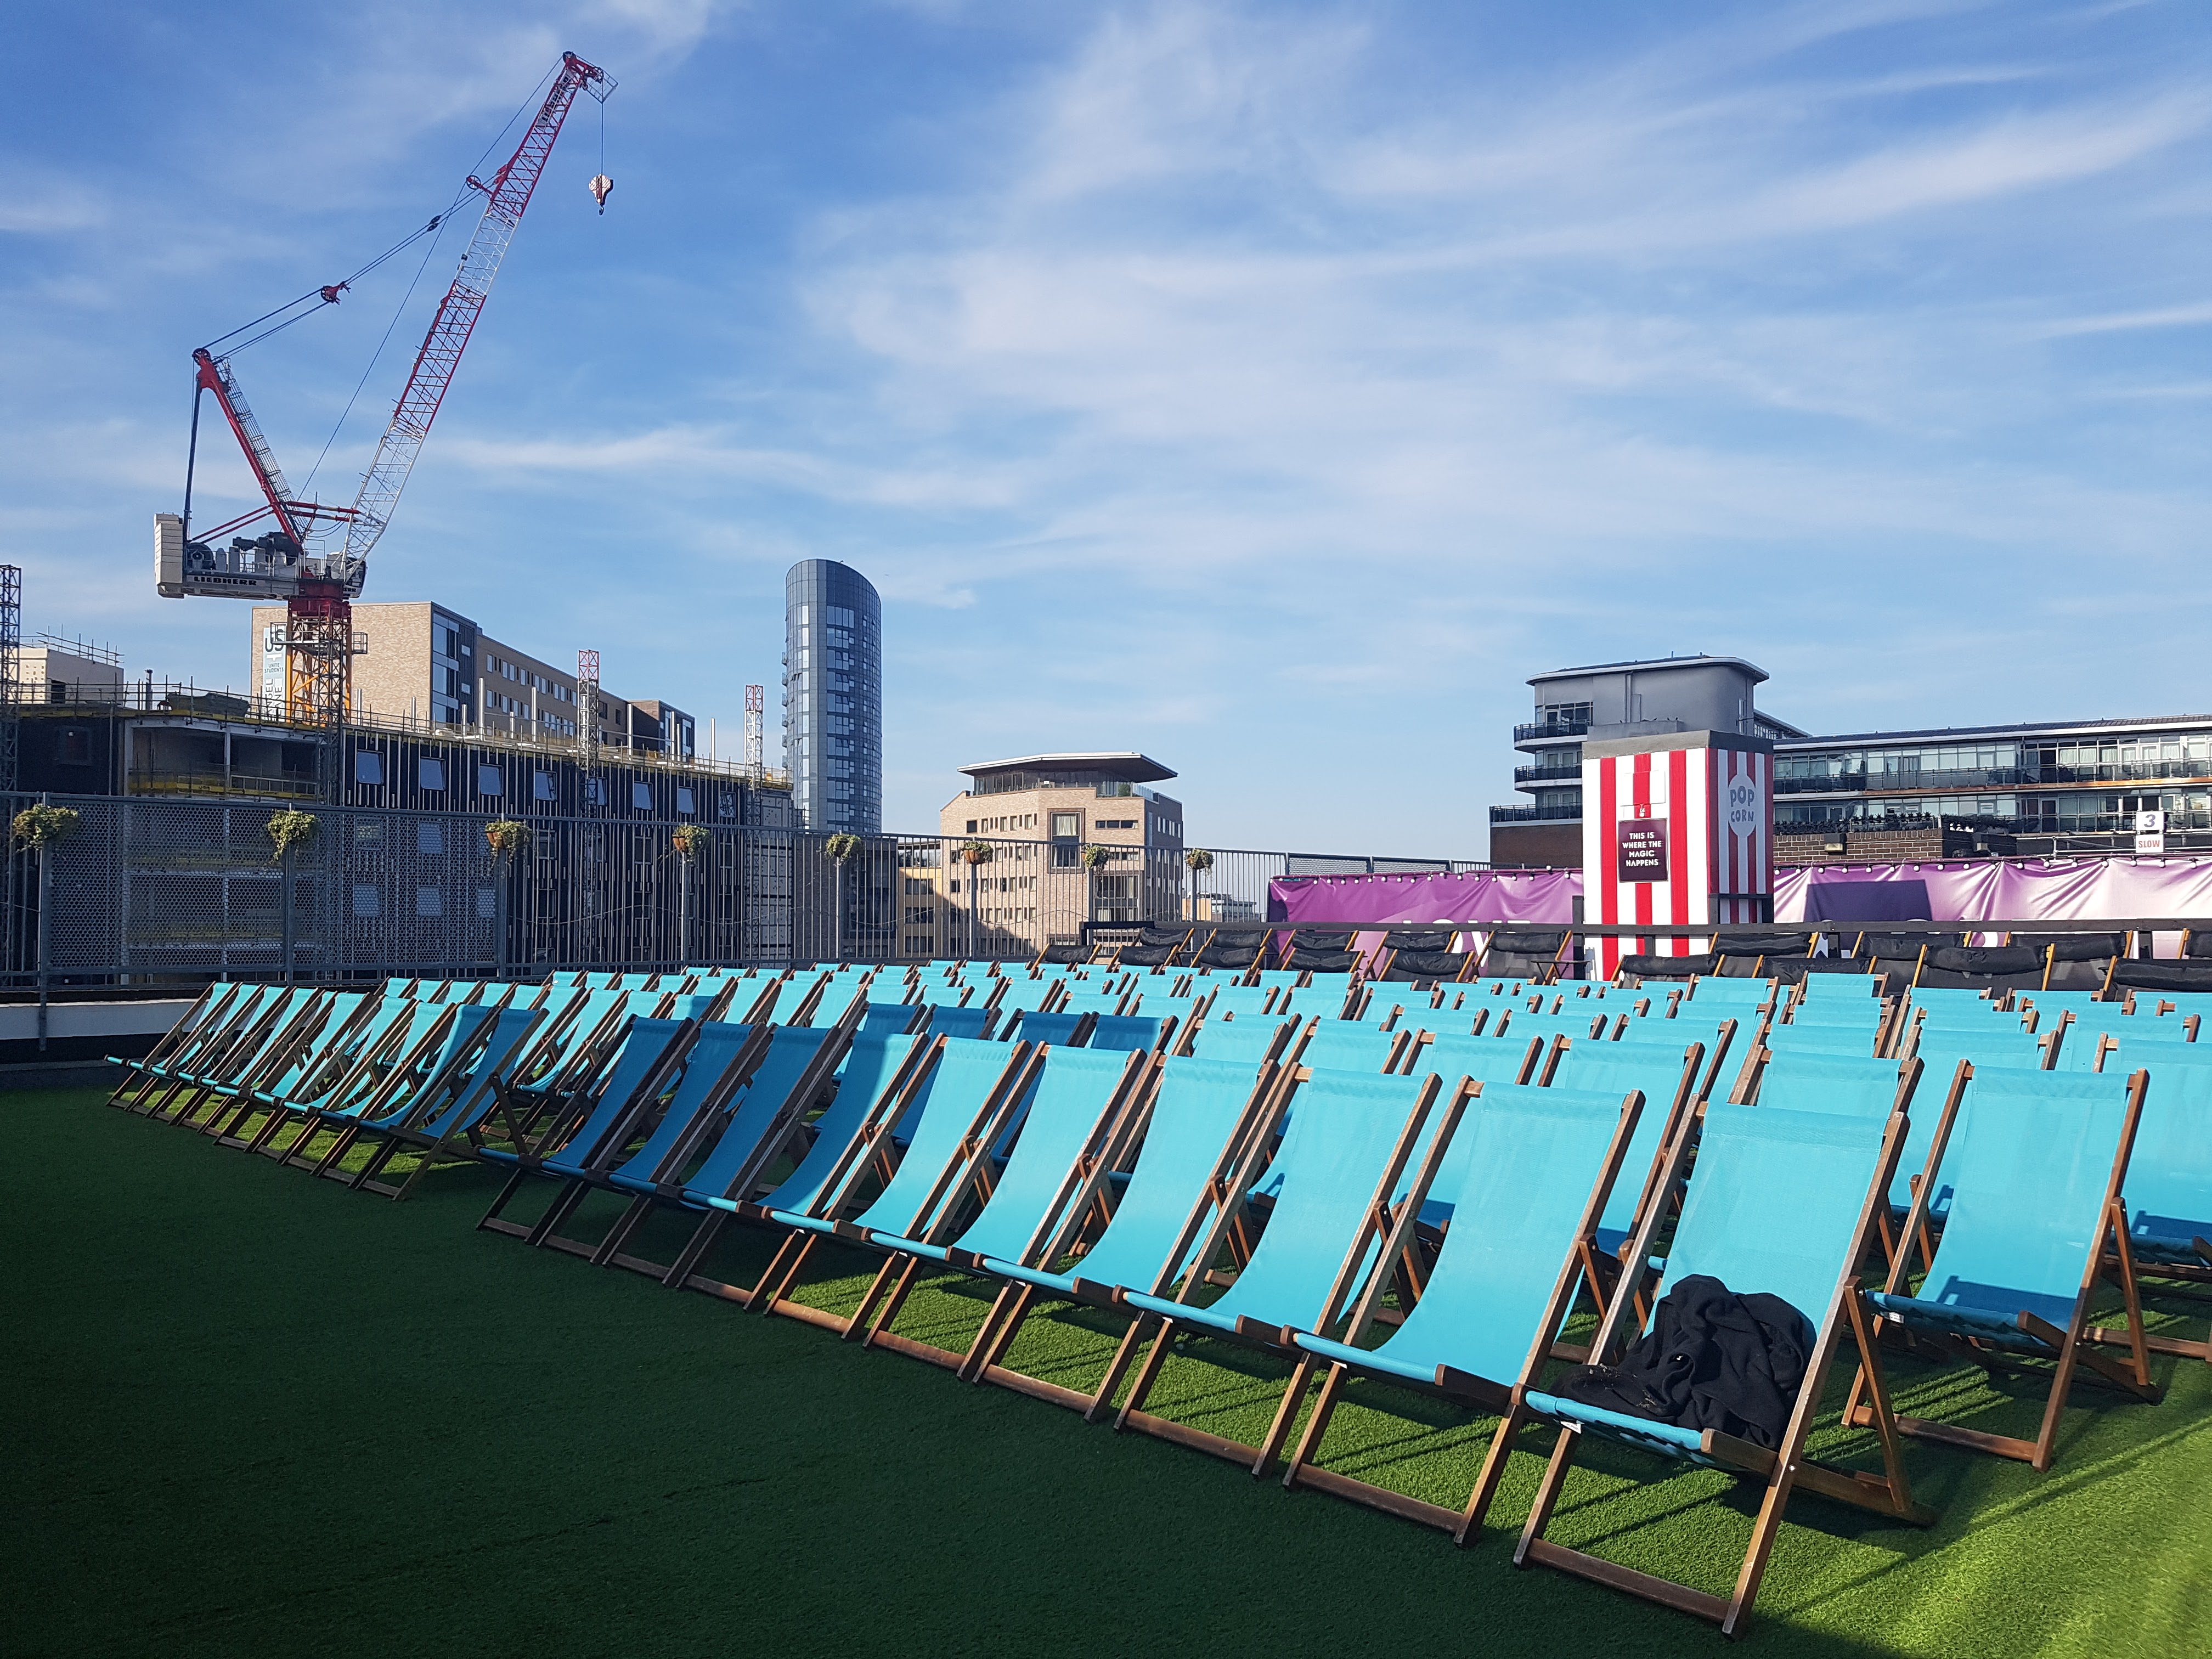 Rows of light blue deck chairs in Outdoor Cinema, Roof East